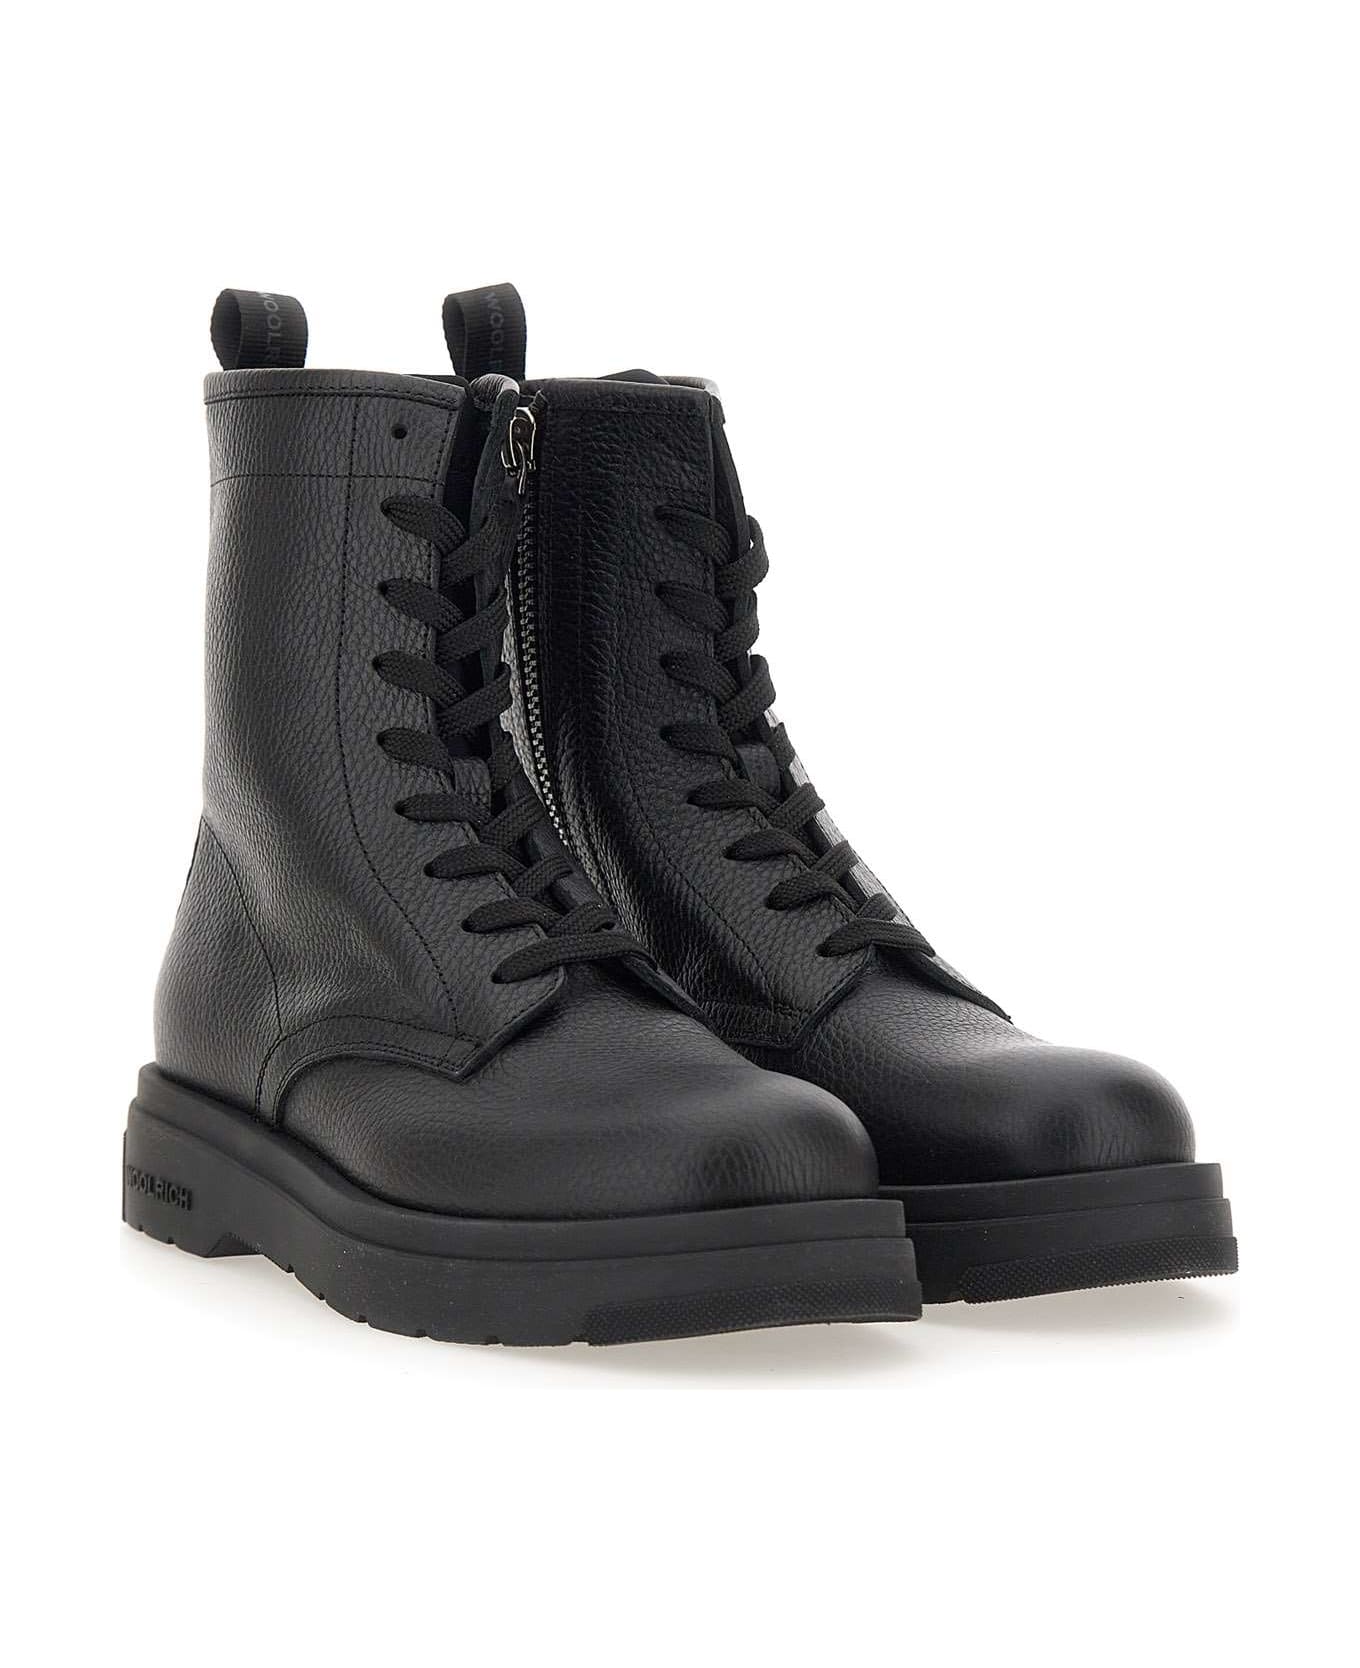 Woolrich New City' Tumbled Leather Boots - Black ブーツ